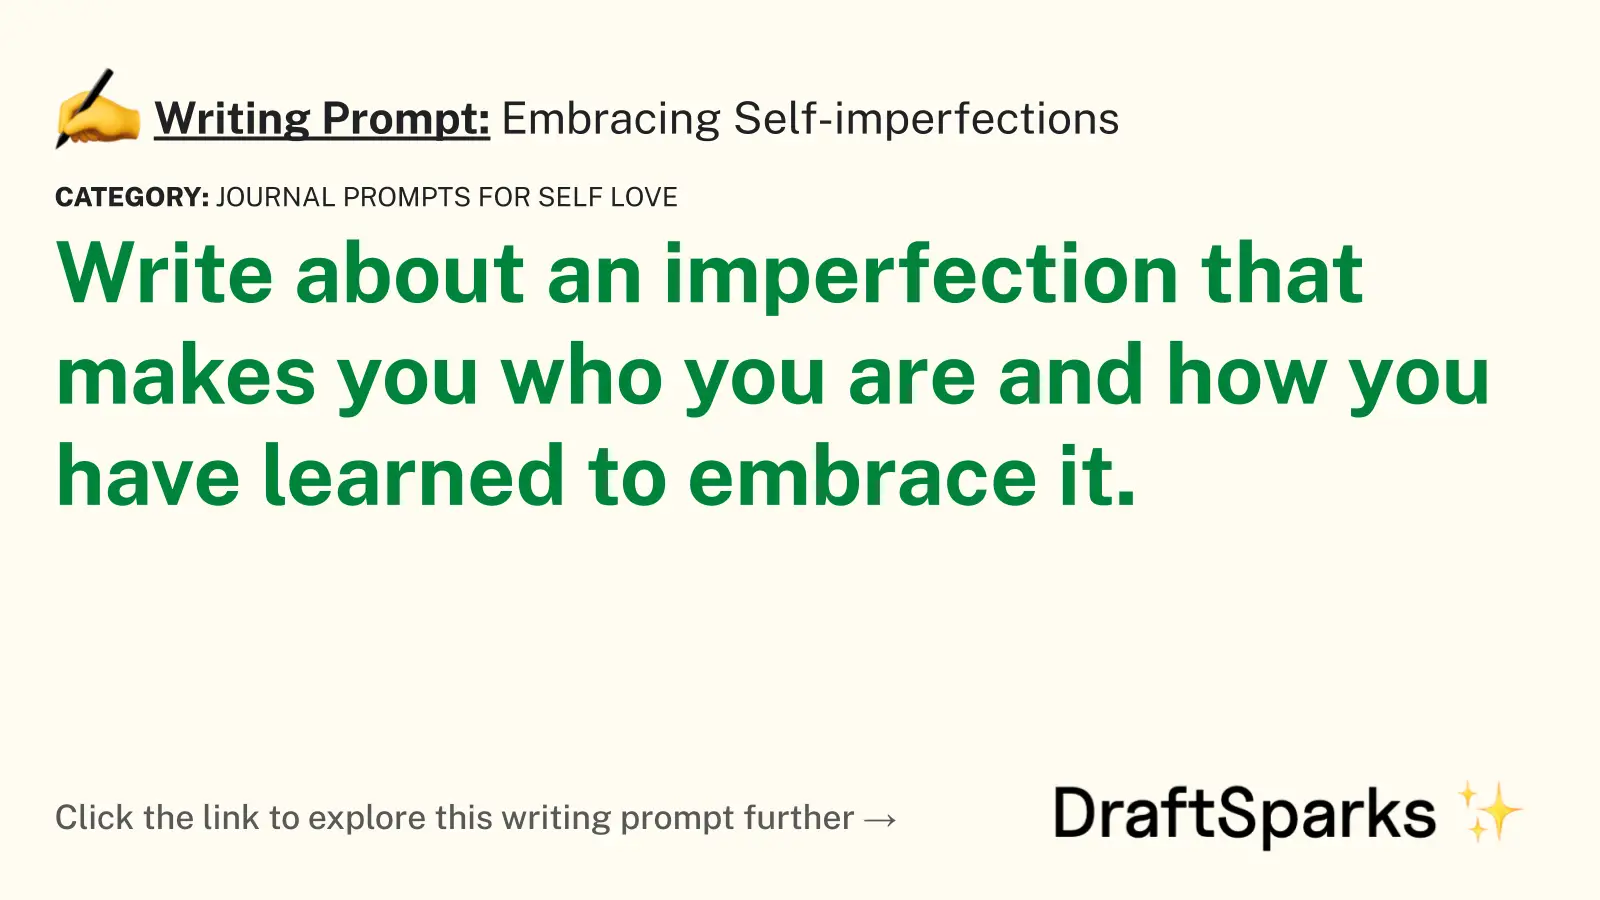 Embracing Self-imperfections